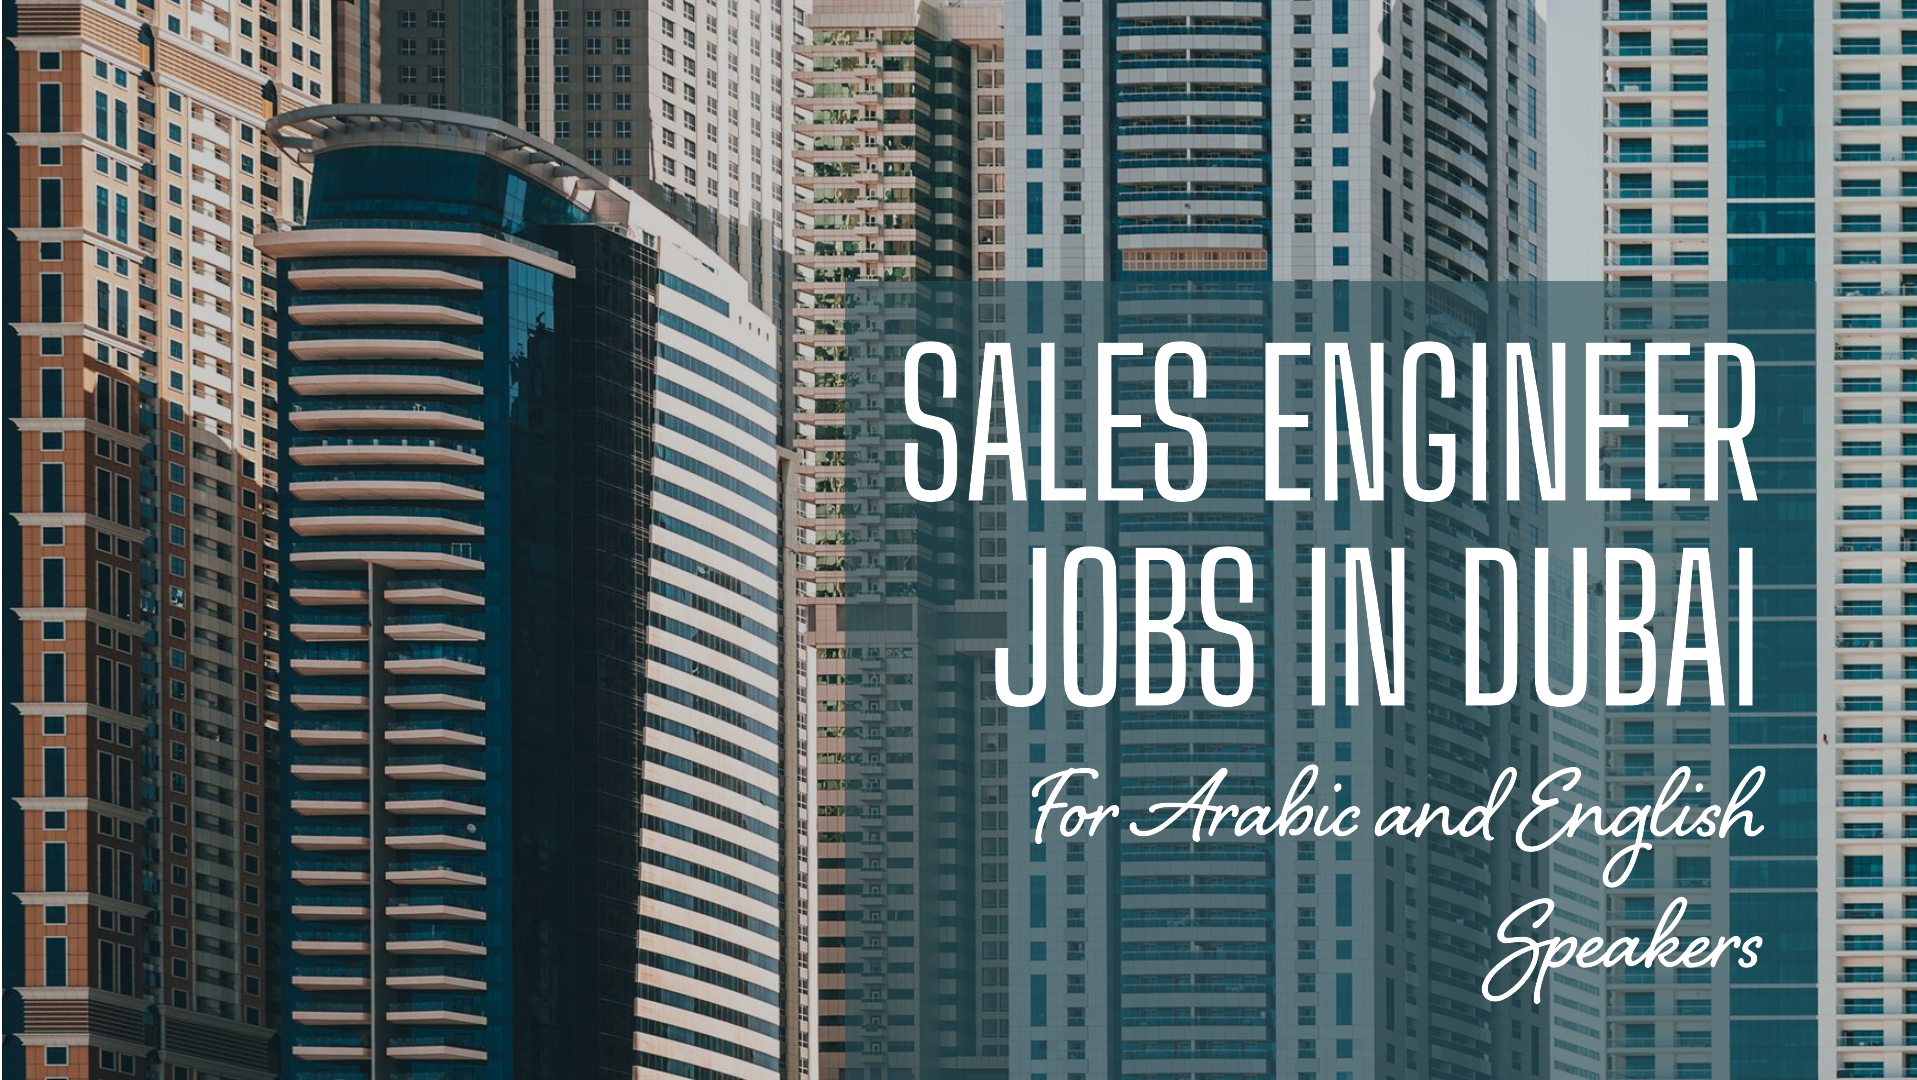 Sales Engineer jobs in Dubai for Arabic and English speakers